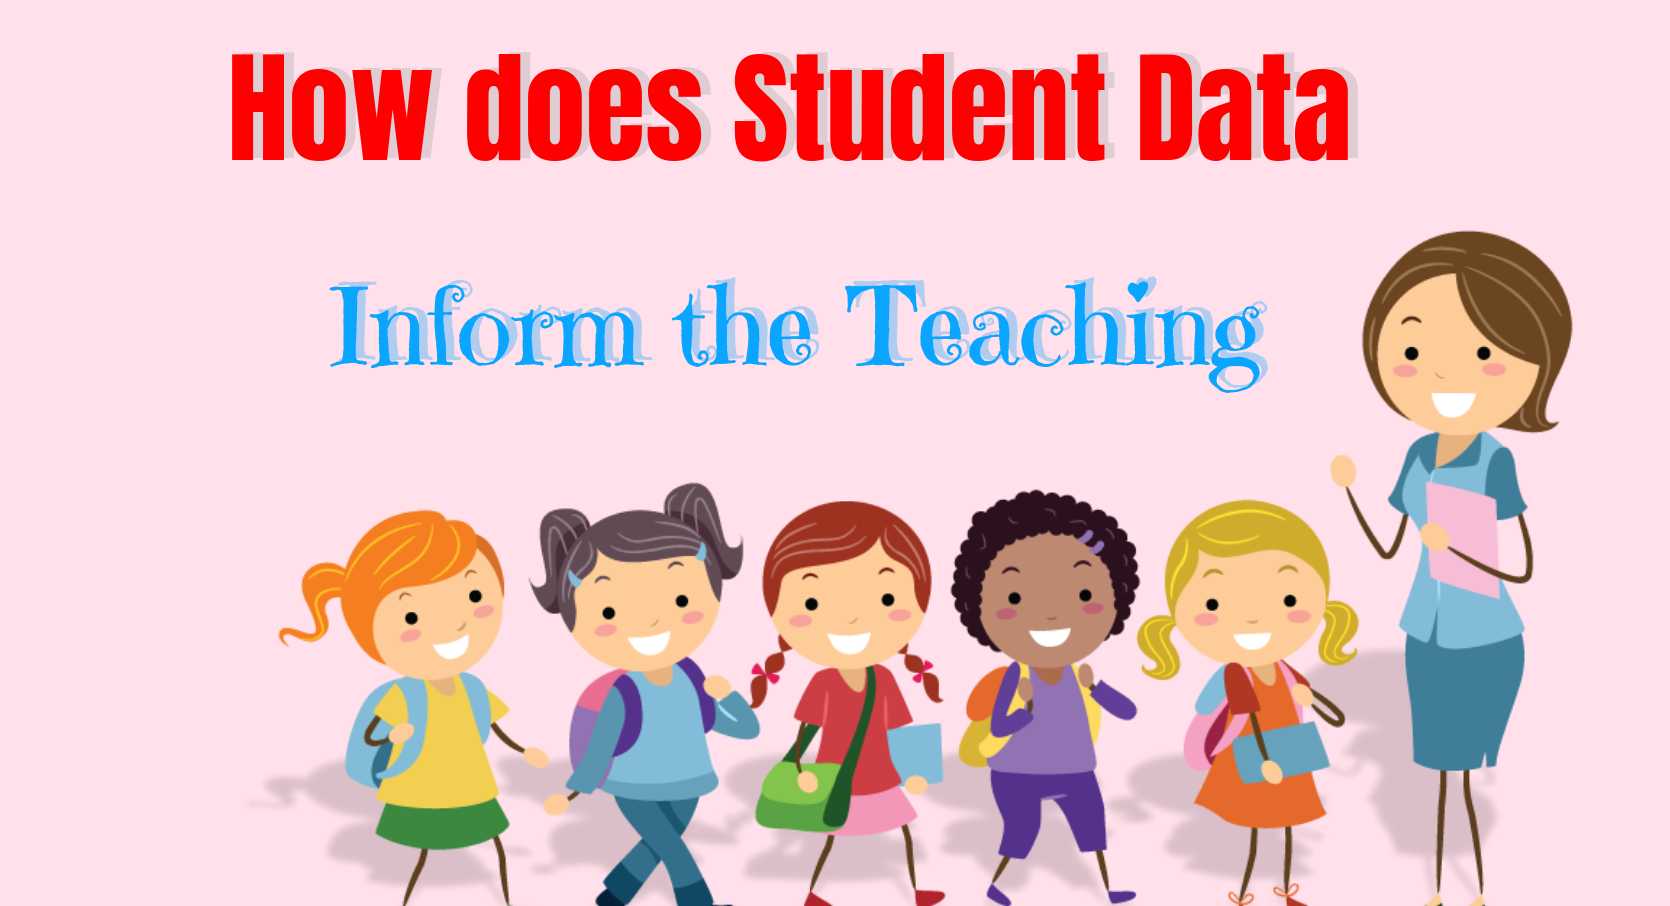 How does Student Data help Inform the Teaching